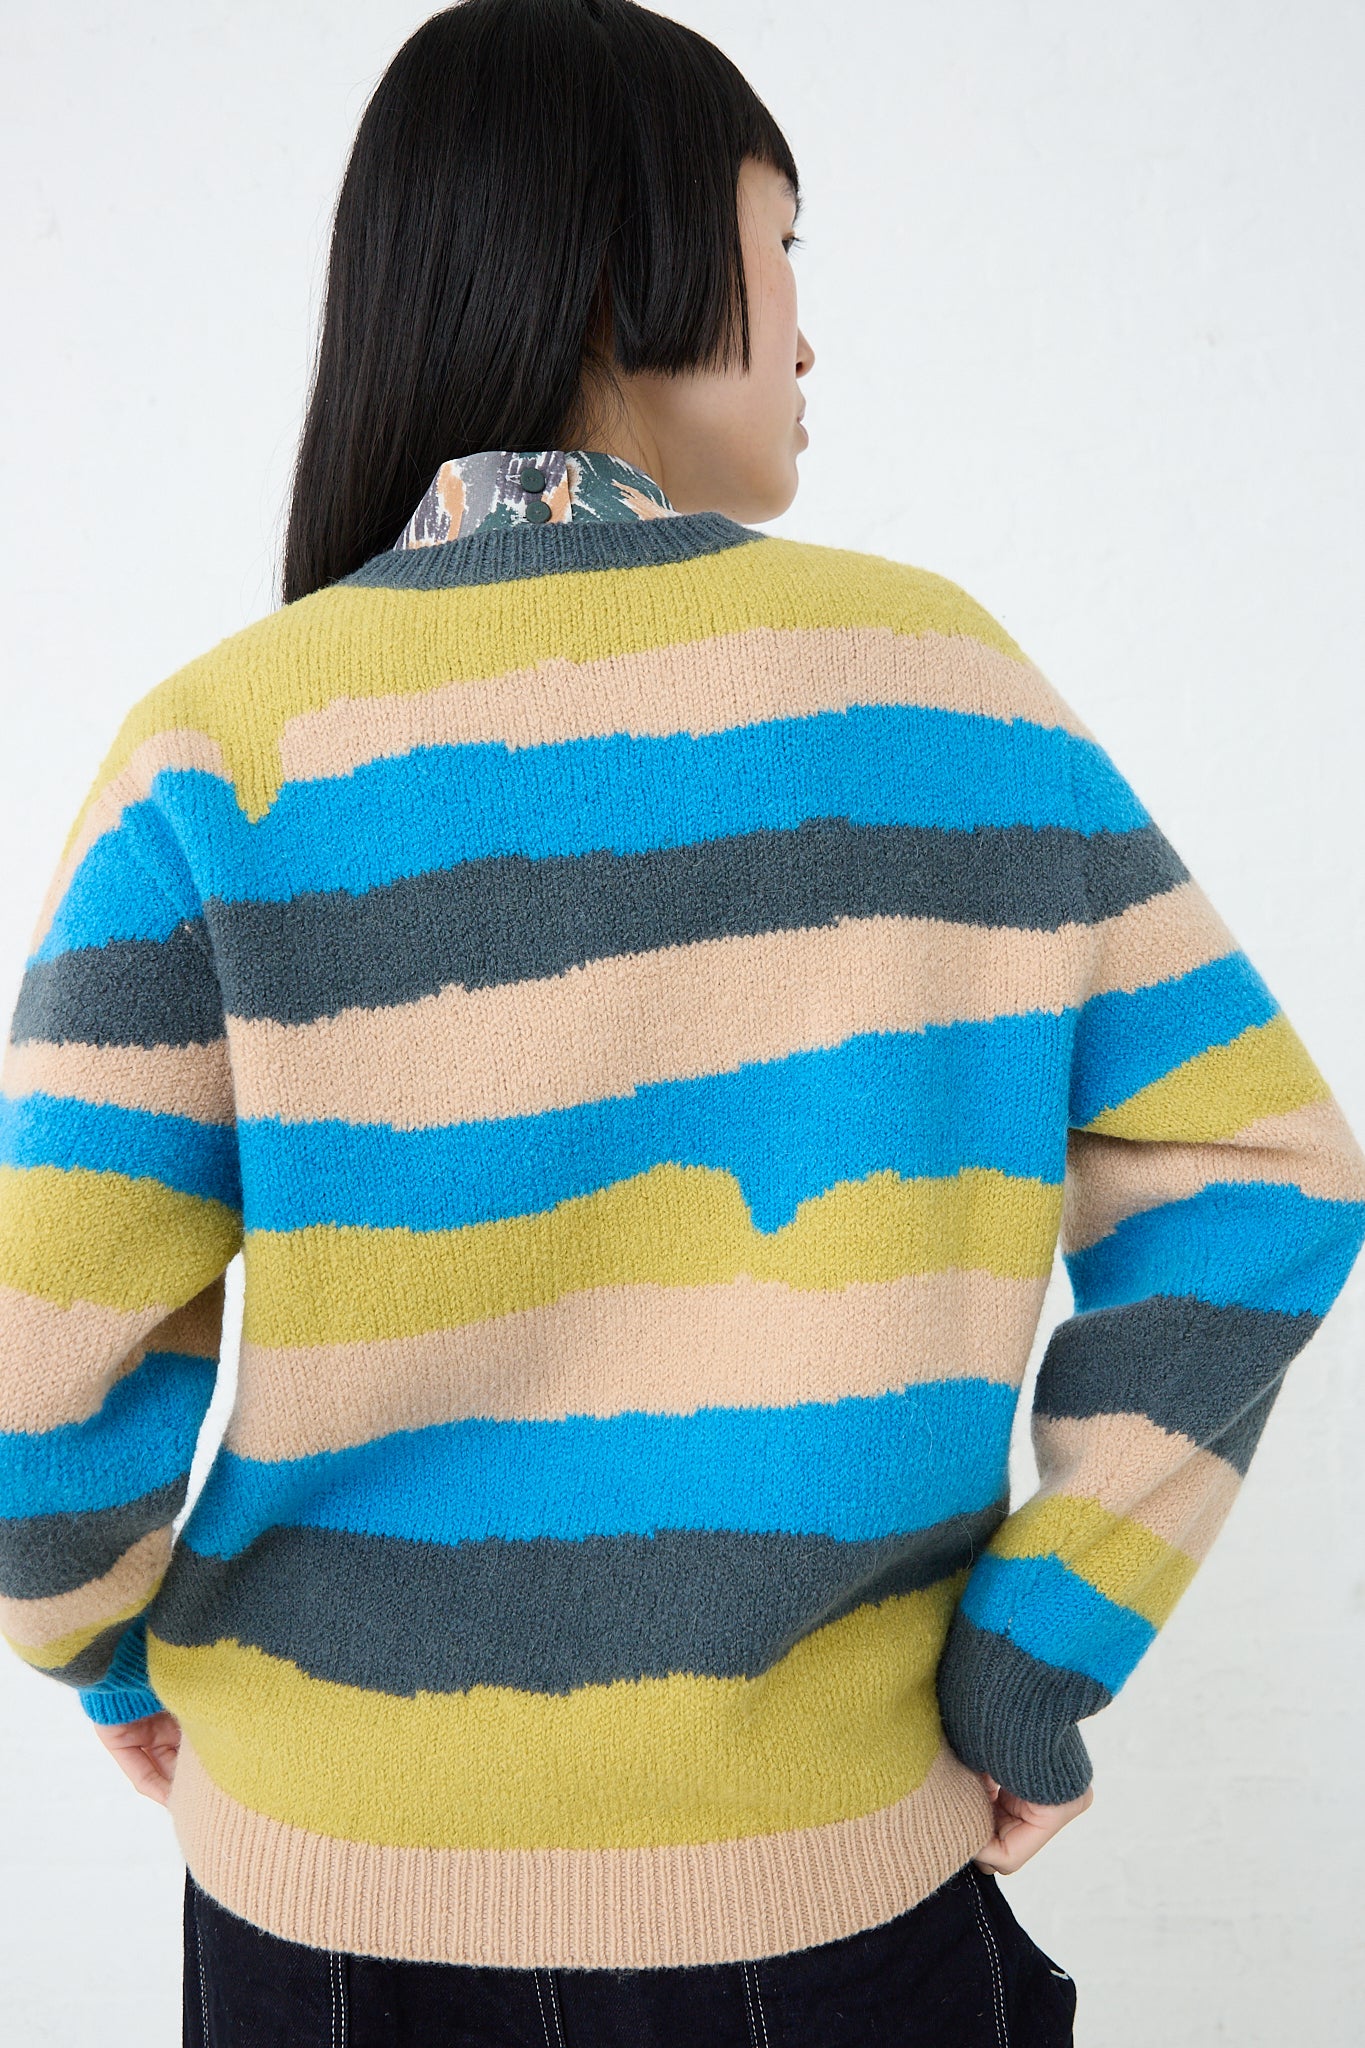 The back view of a woman wearing a Mina Perhonen Light Wind Sweater in Blue Mix.